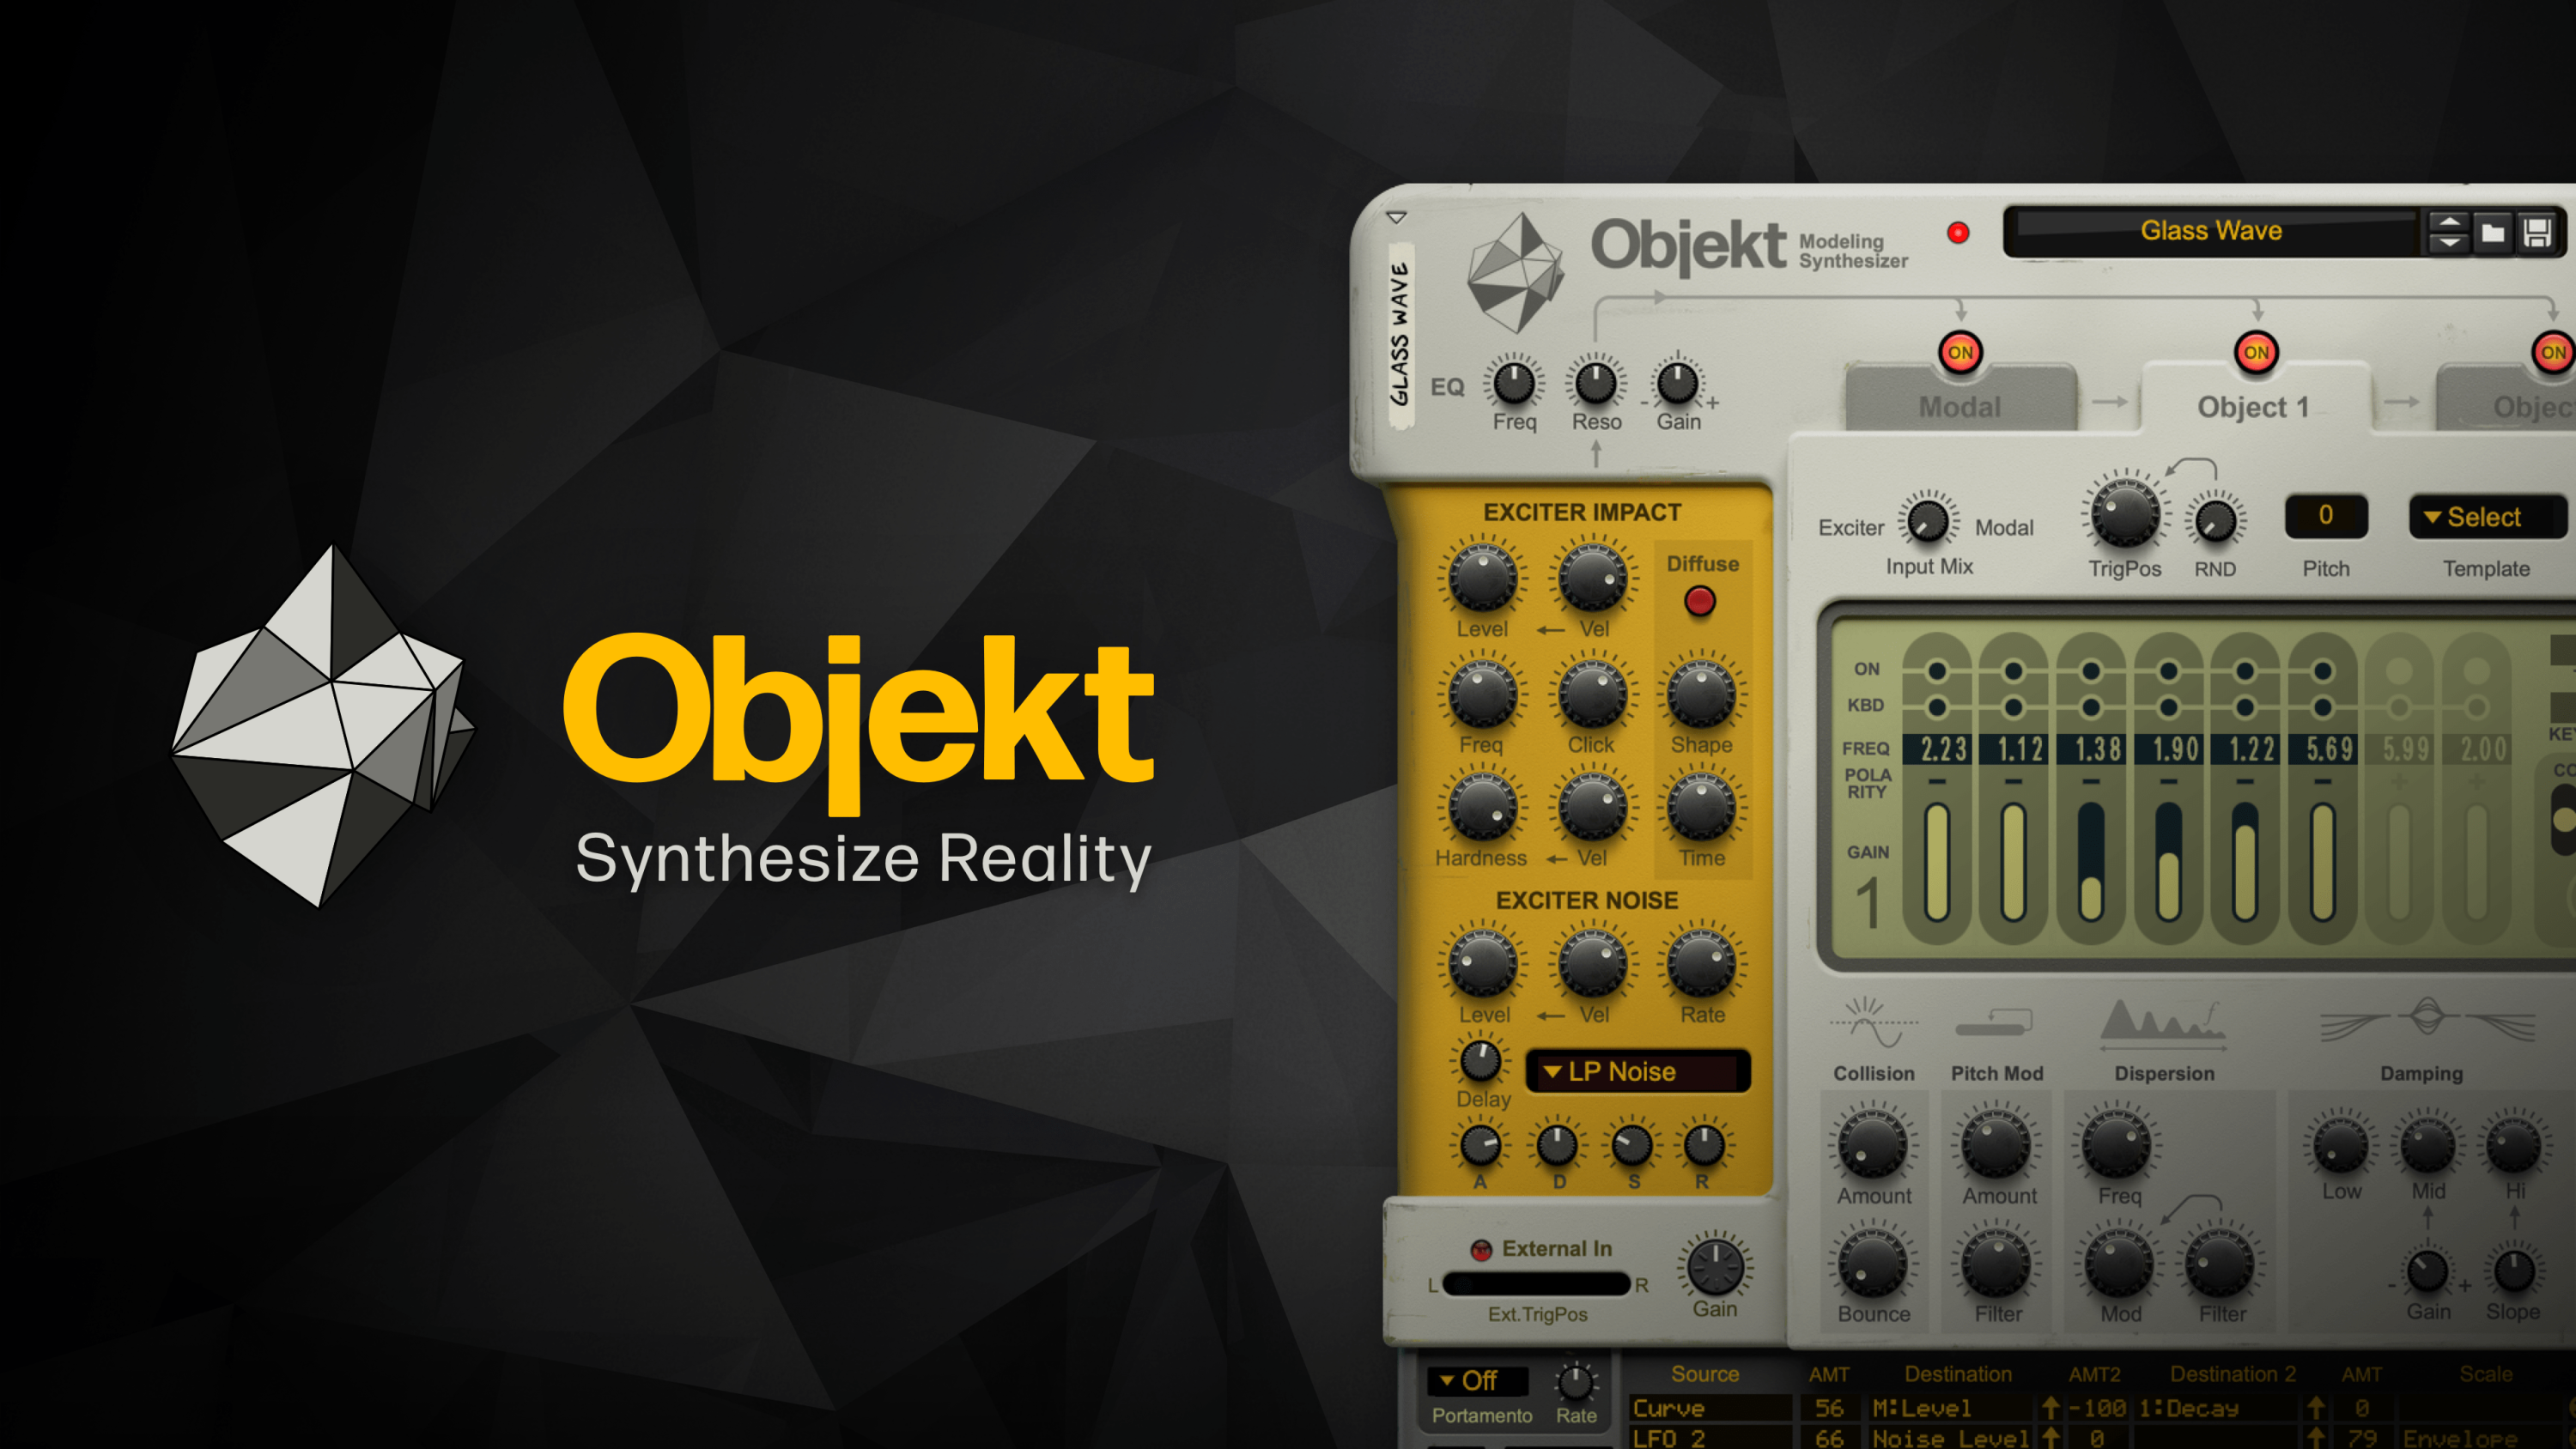 Cover Image for Synthesize reality: Reason Studios introduce Objekt Modeling Synthesizer